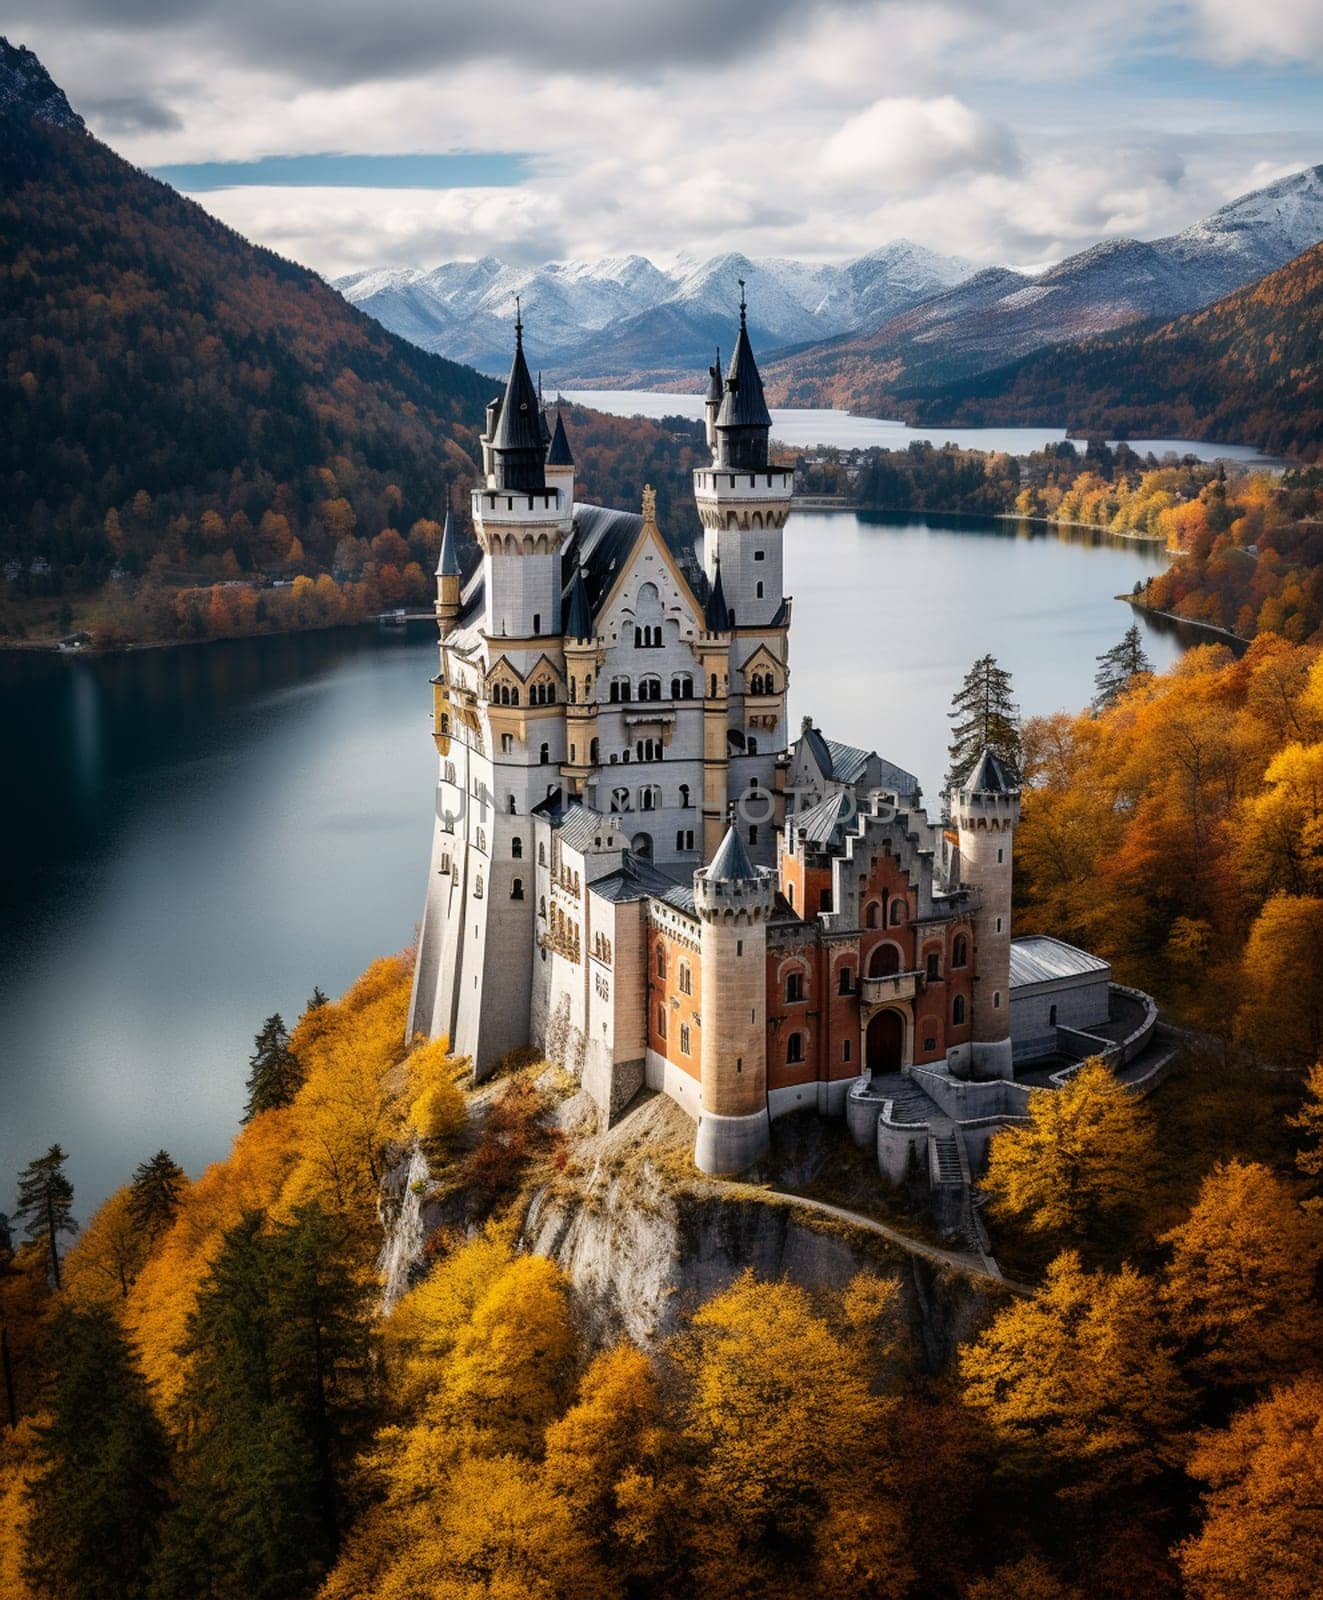 Beautiful view of world-famous Neuschwanstein Castle, the nineteenth-century Romanesque Revival palace built for King Ludwig II on a rugged cliff near Fussen, southwest Bavaria, Germany by Andelov13